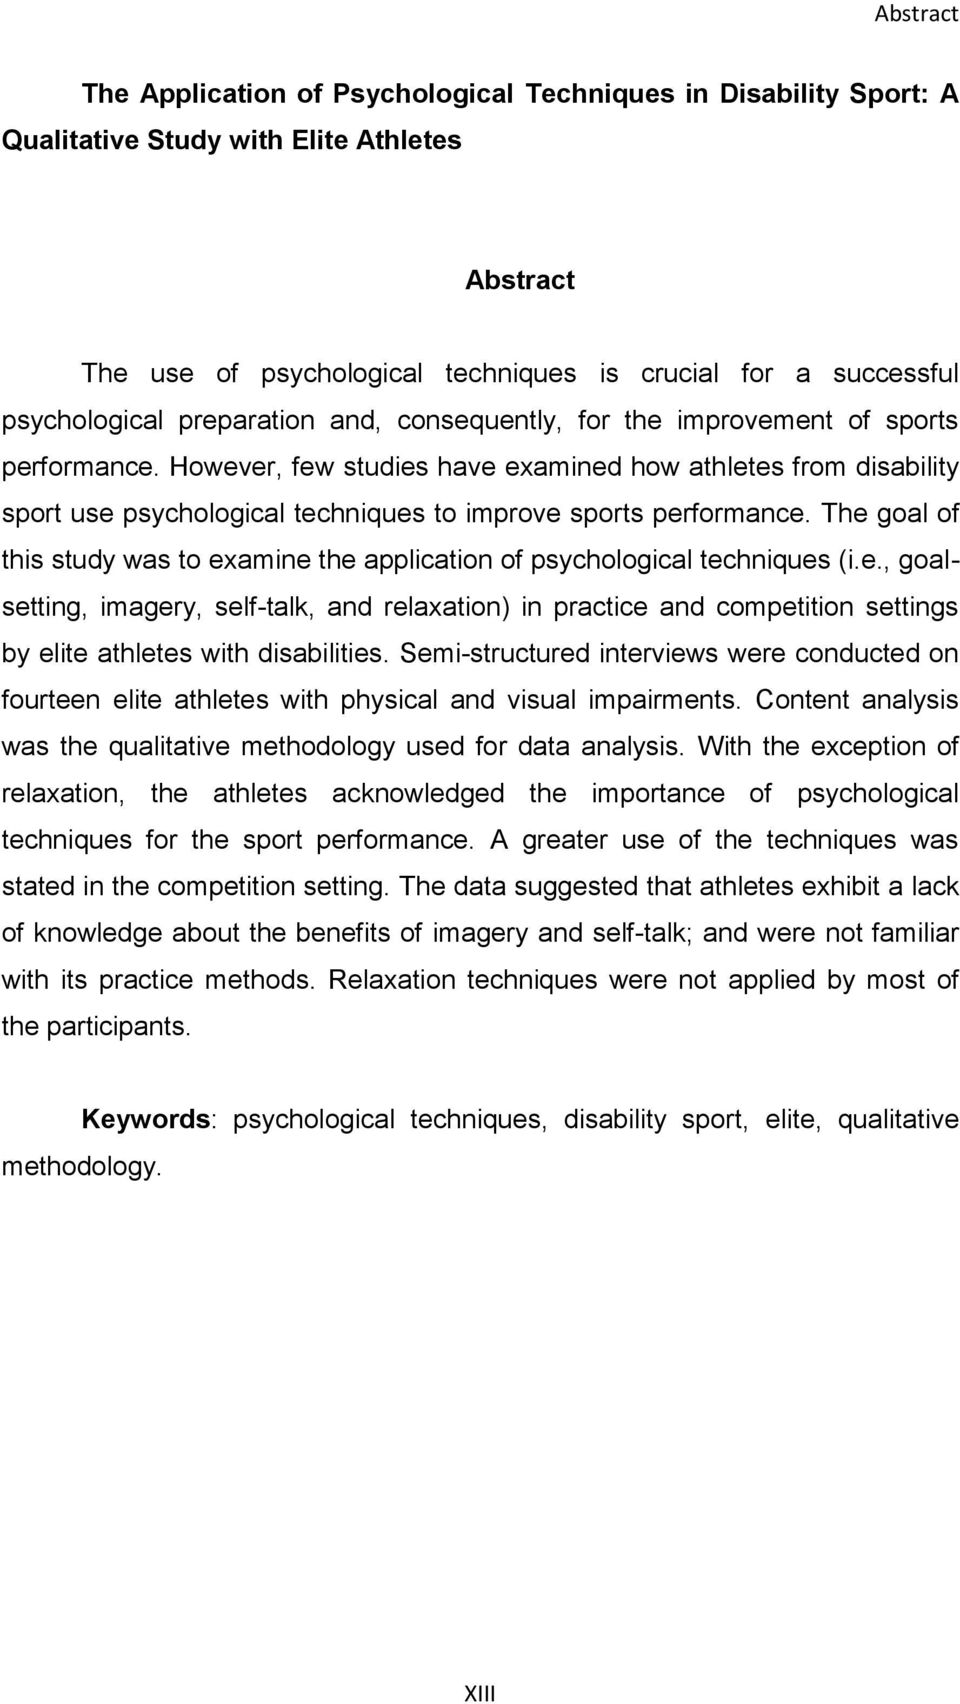 However, few studies have examined how athletes from disability sport use psychological techniques to improve sports performance.